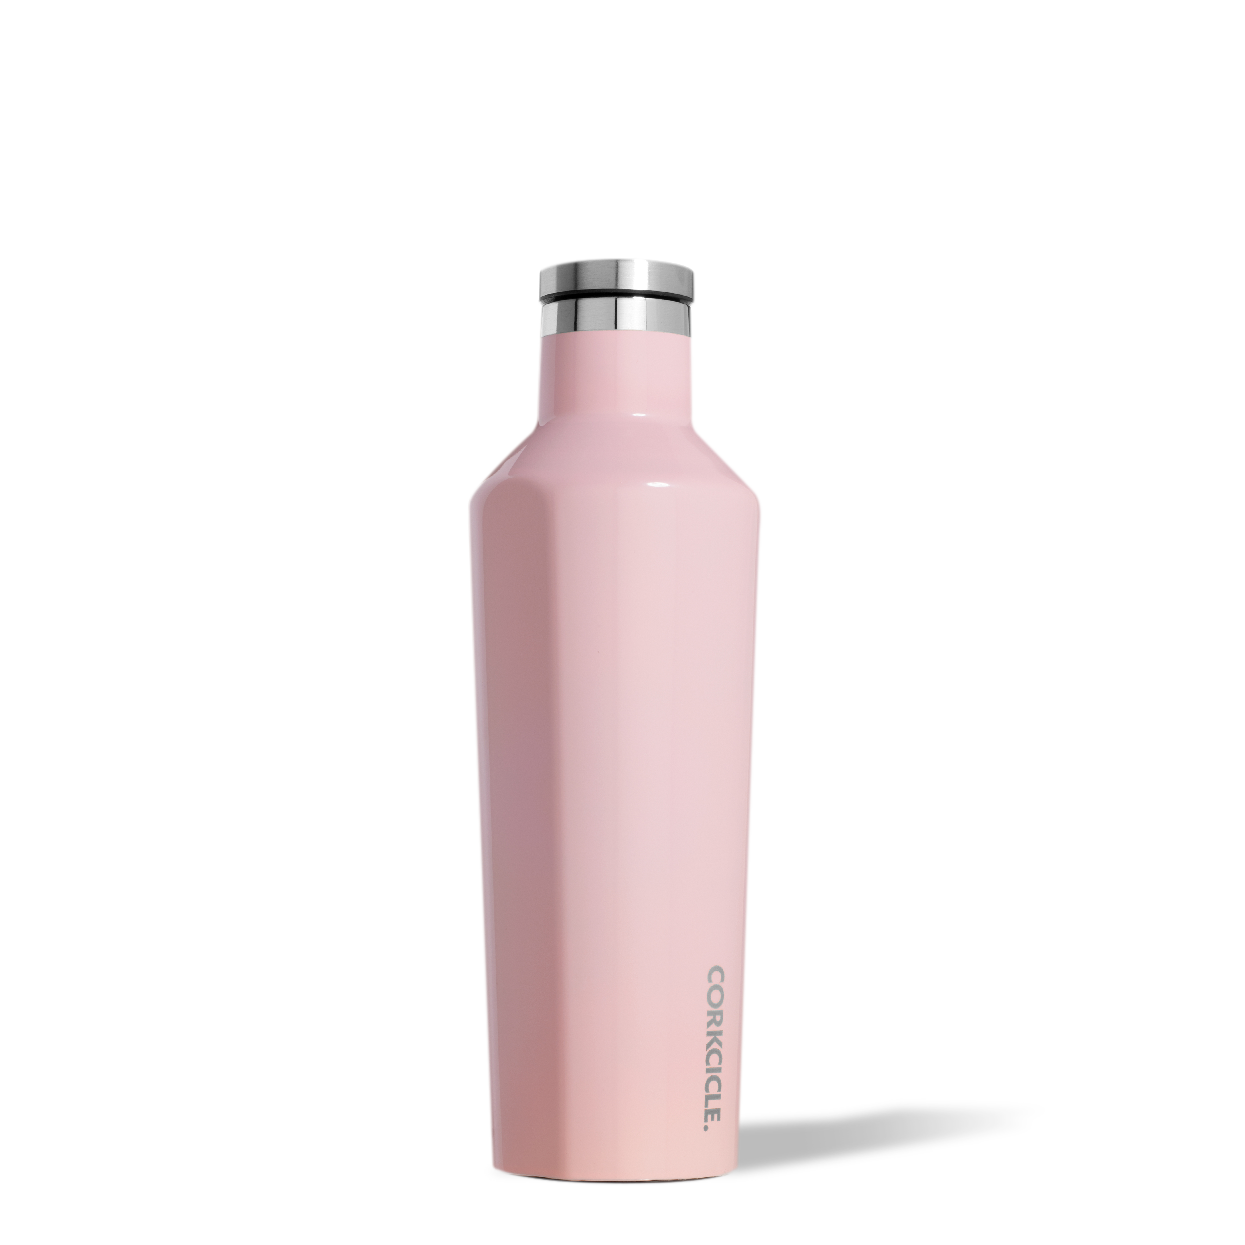 Corkcicle 0.47L Glossy Rose Quartz Canteen Thermos Bottle